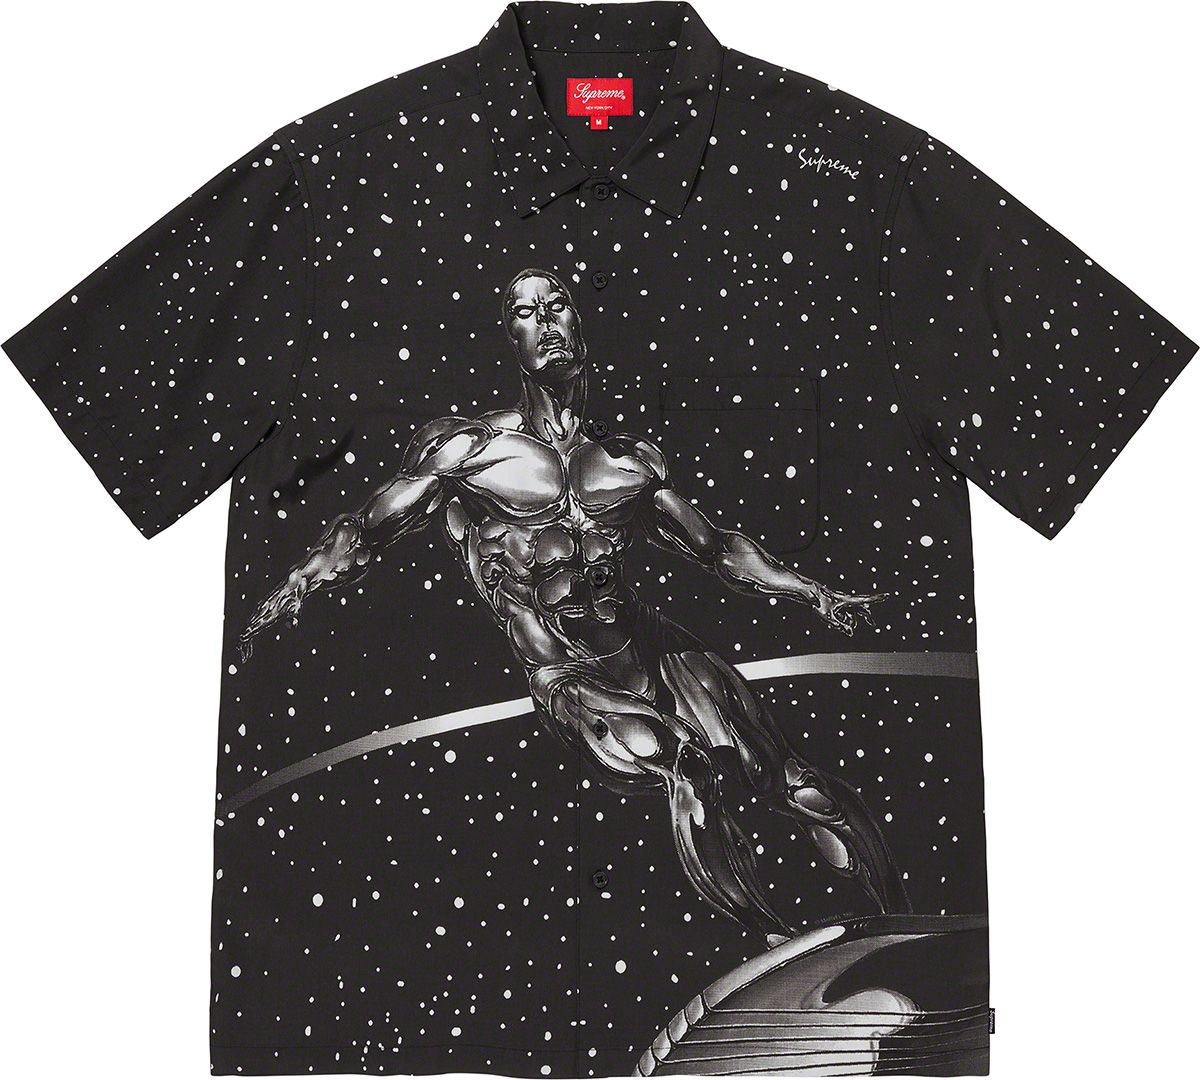 Silver Surfer S/S Shirt - Spring/Summer 2022 Preview – Supreme